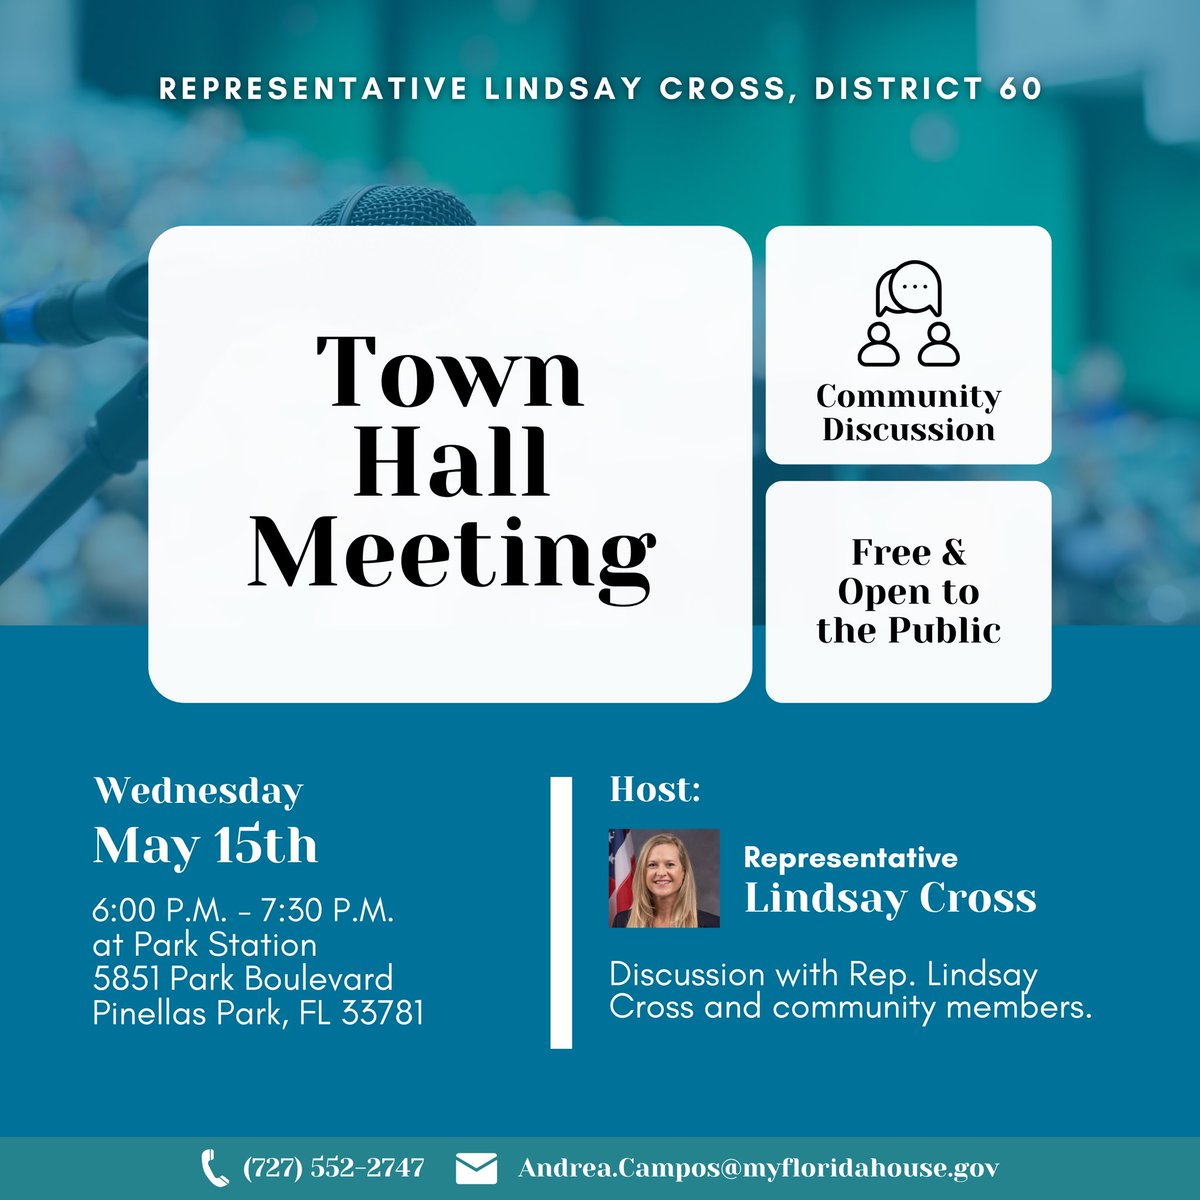 Excited to host 2 community town halls next week in St Pete and Pinellas Park!

Tues, May 14th, 6pm
Willis S. Johns Rec Center (Fossil Park), St Pete

Wed, May 15th, 6pm
Park Station, Pinellas Park 

Everyone is welcome!

#townhalls #stpete #pinellaspark